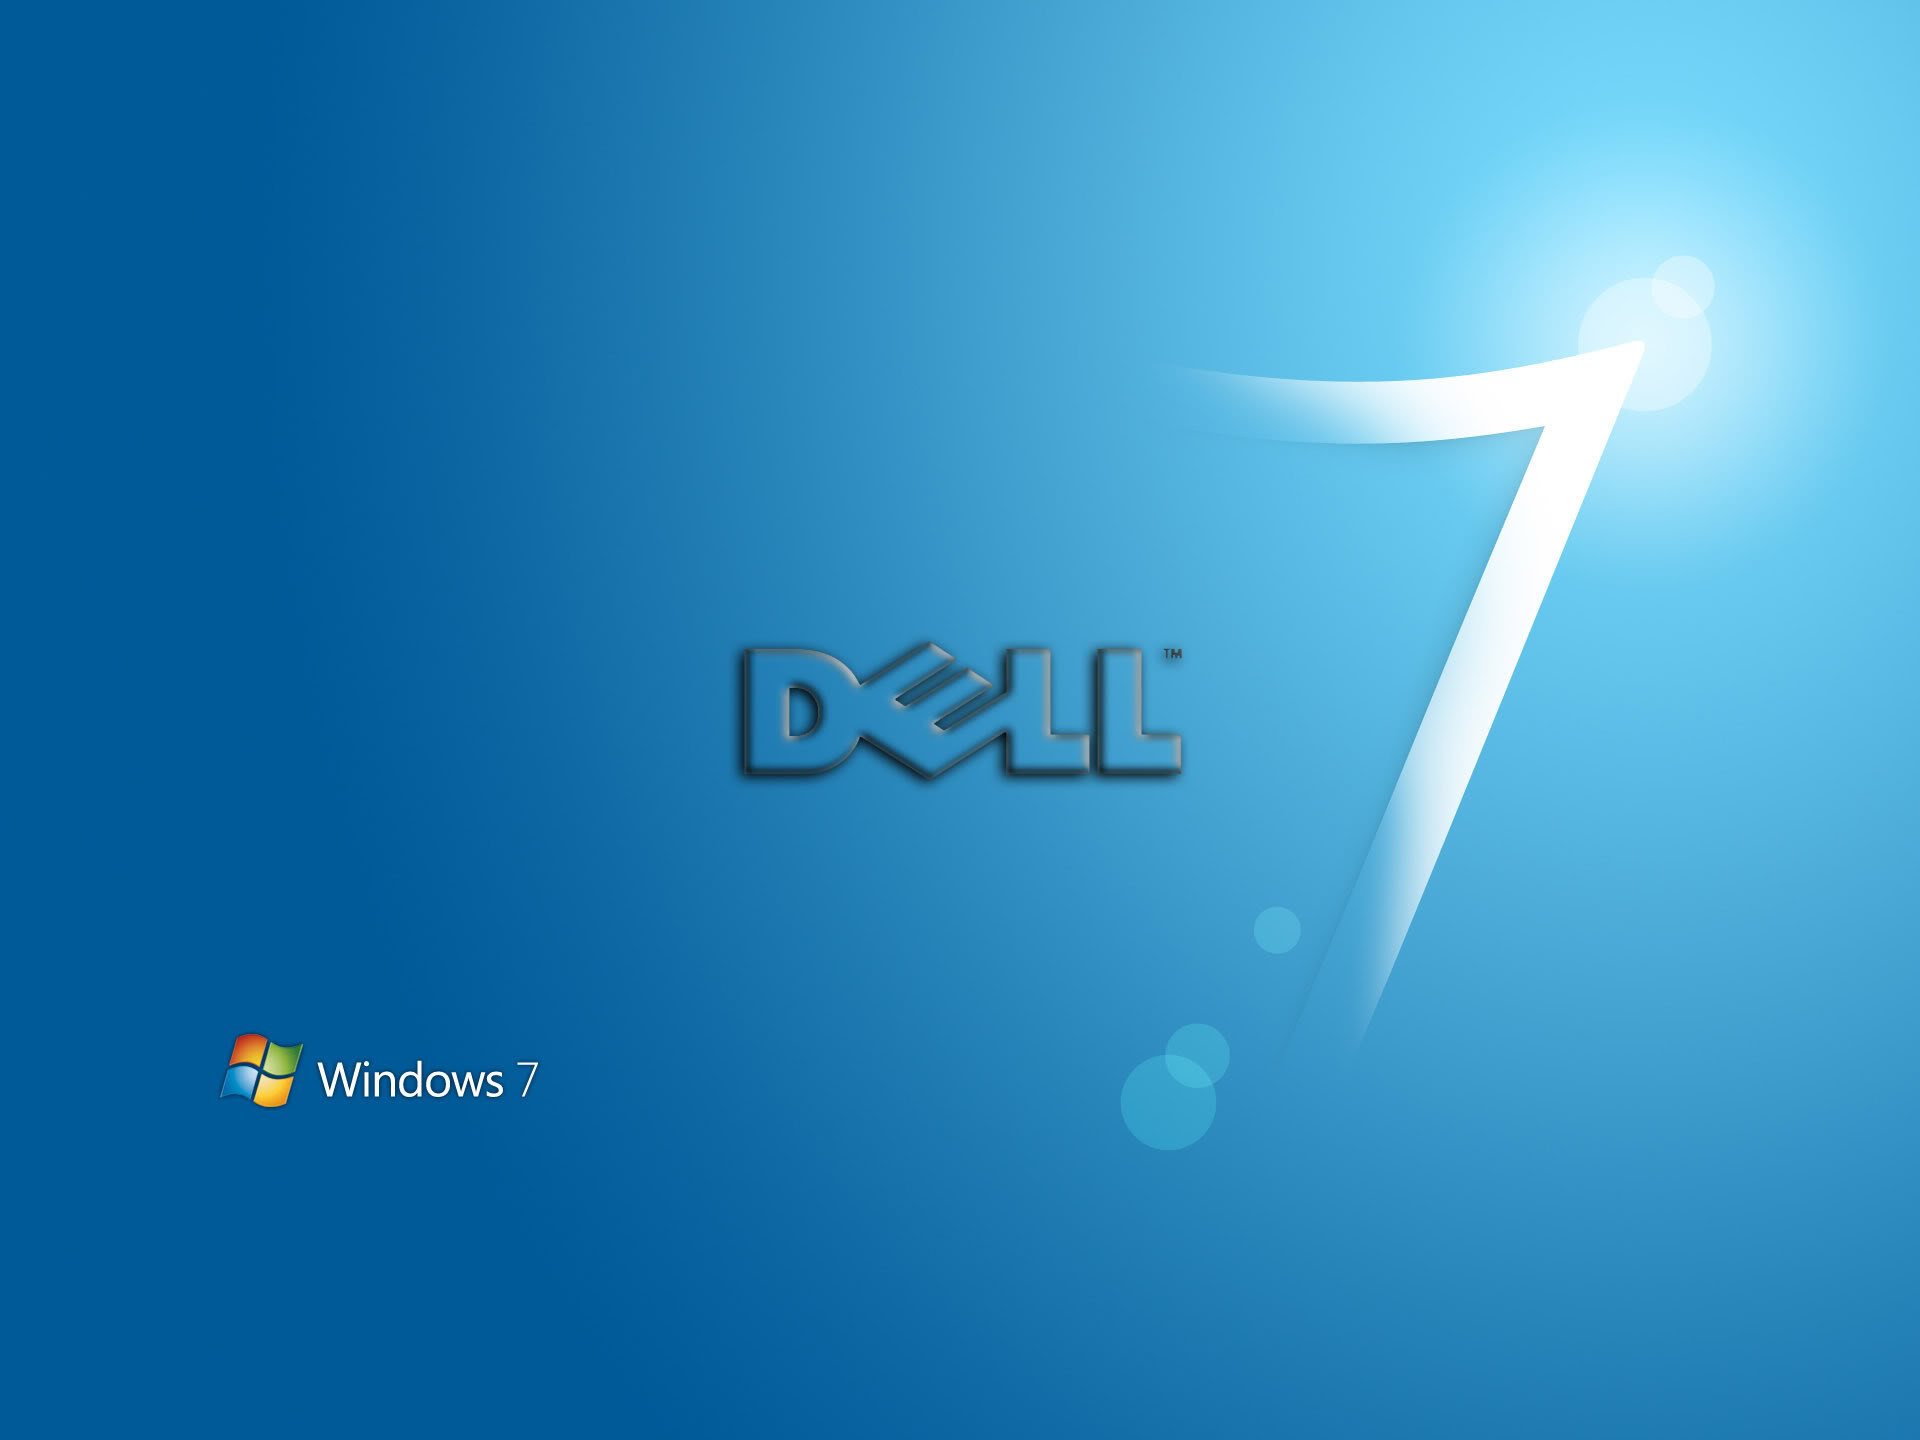 Dell Inspiron Wallpapers  Wallpaper Cave